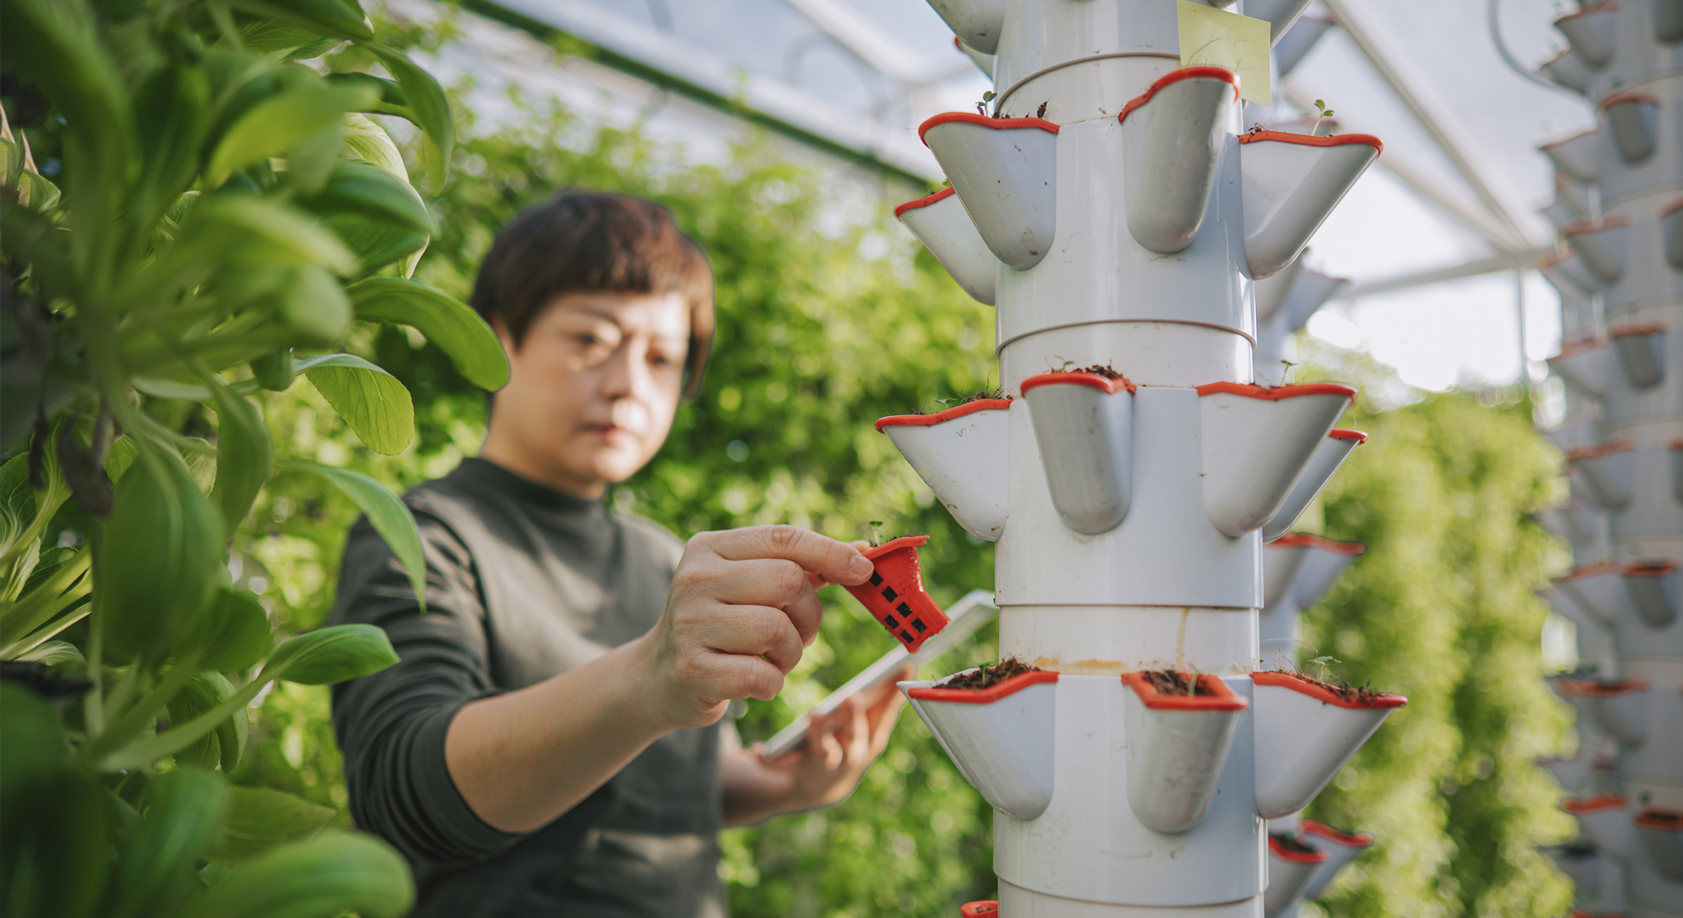 A person tending to a vertical farm in a green house